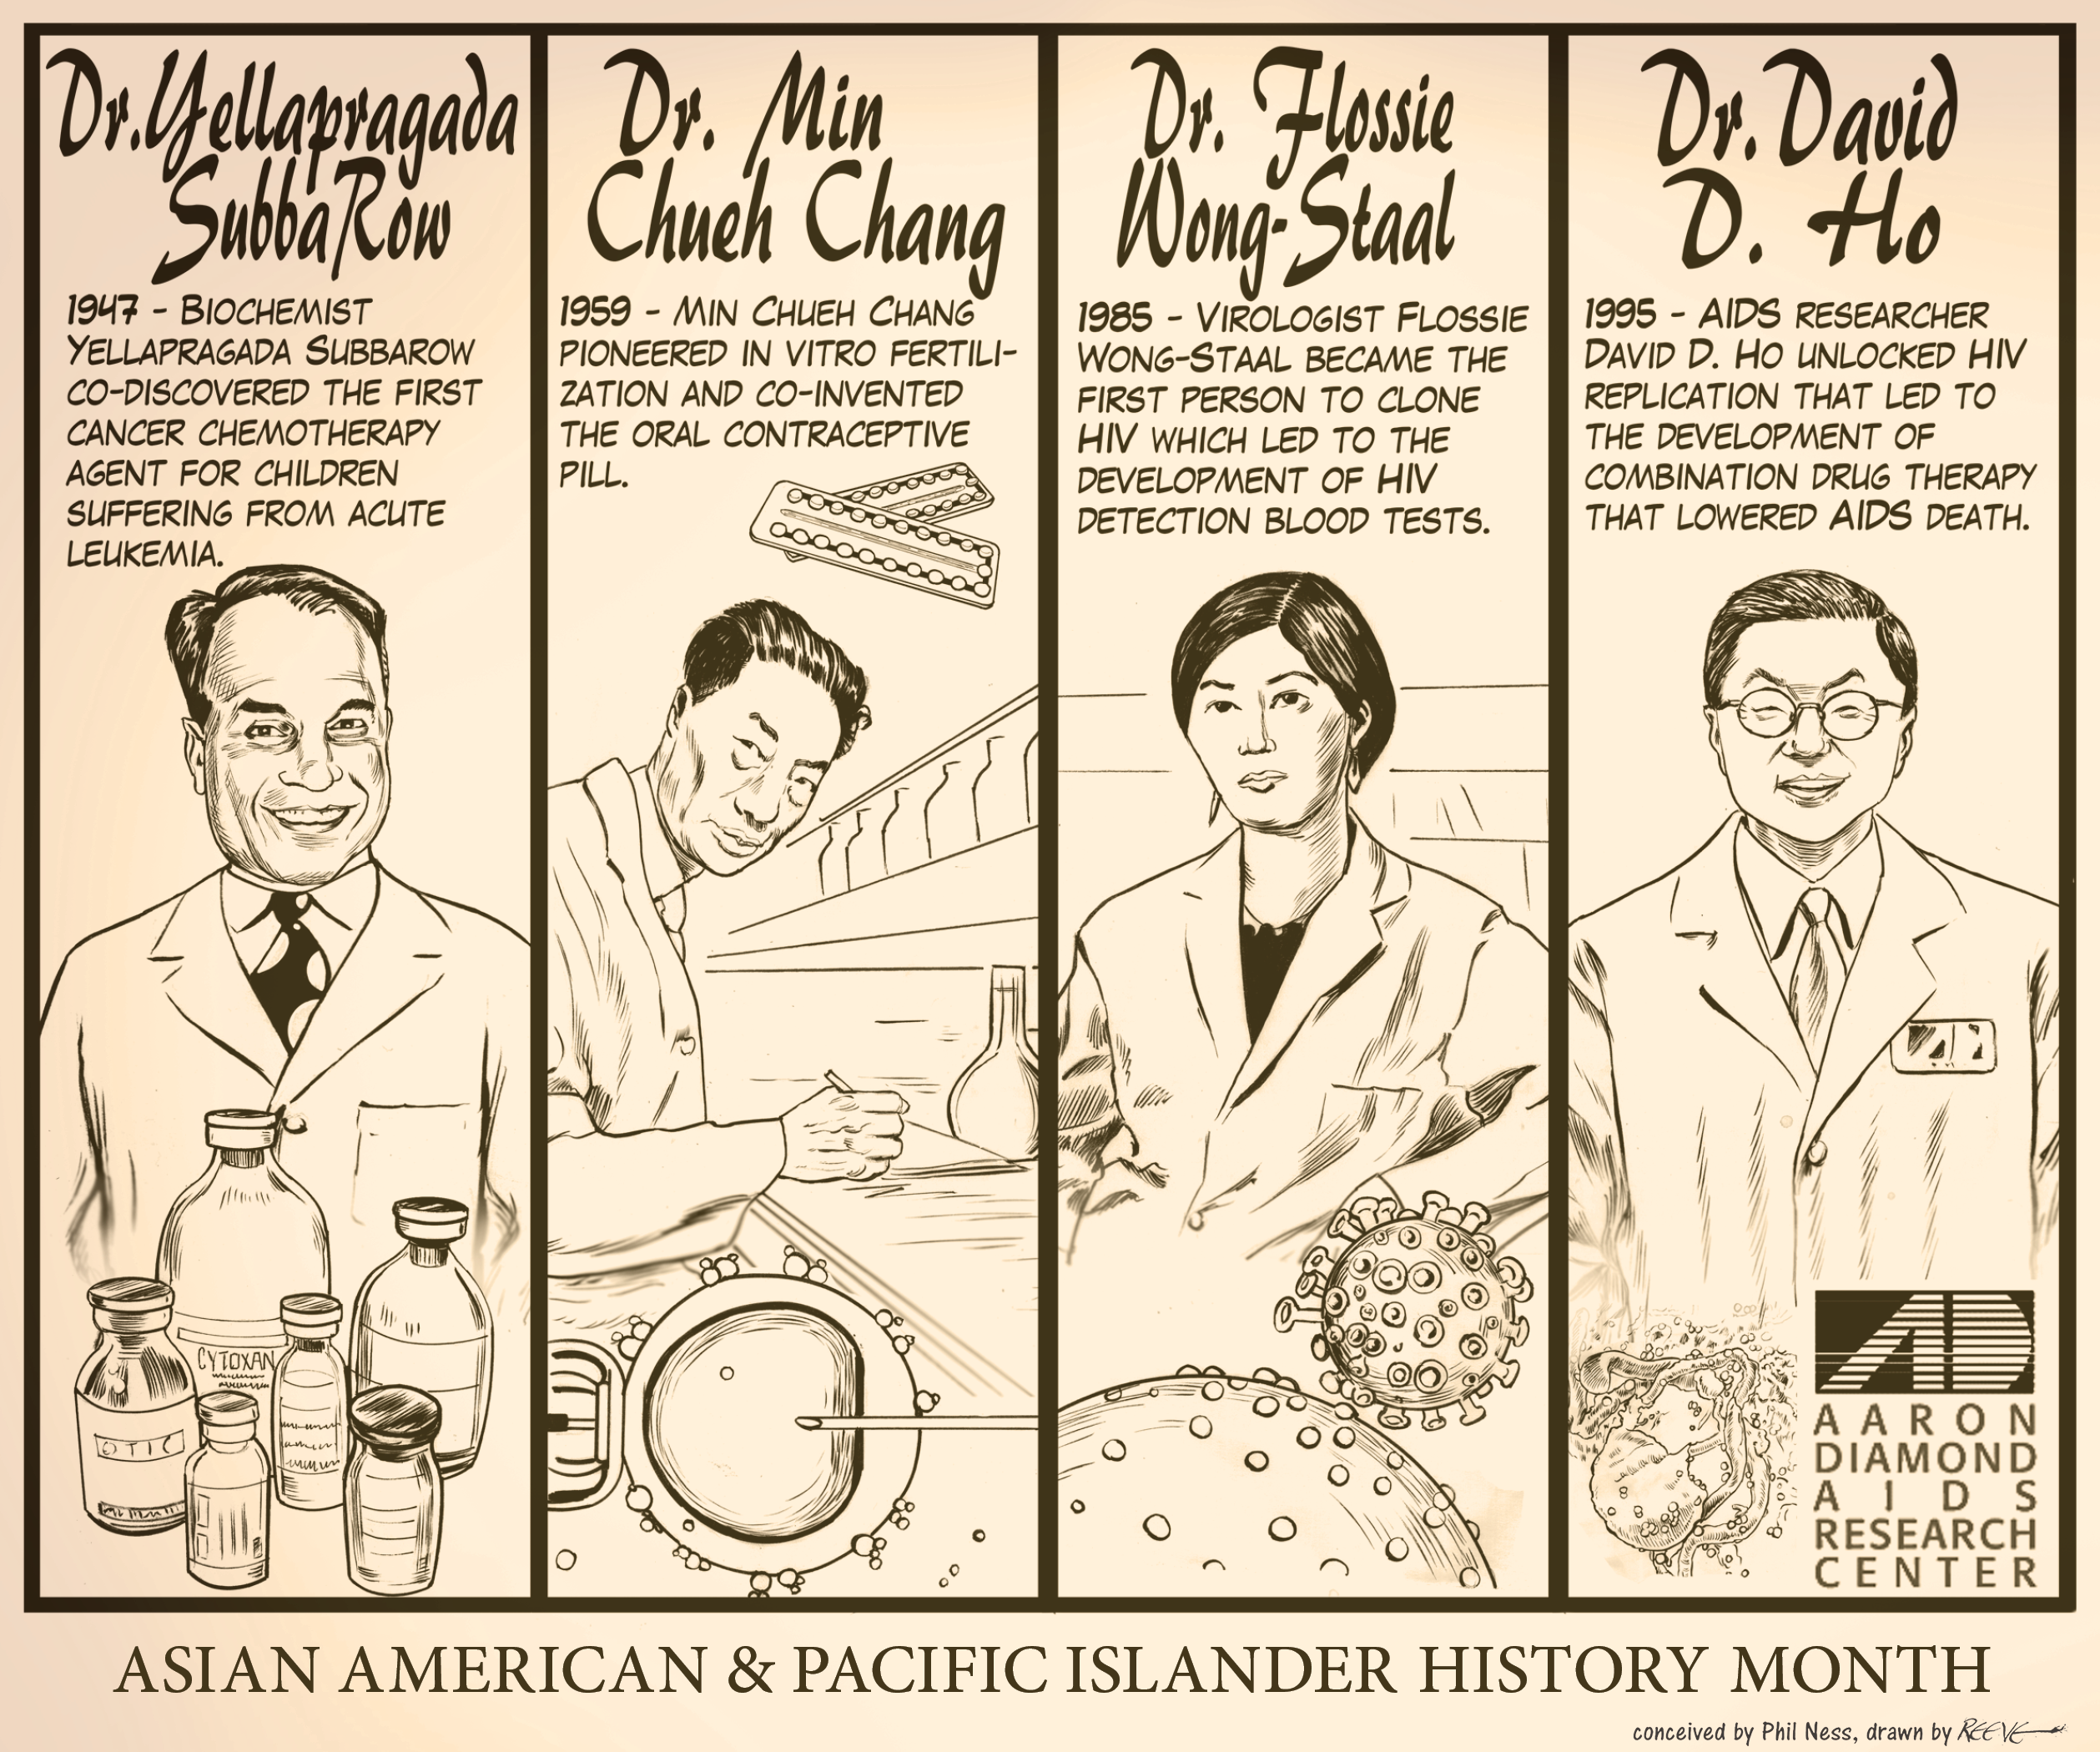 Cartoon: Asian American and Pacific Islander History Month, Panel 4 of 4, Conceived by Phil Ness, drawn by Reeve, 2022.